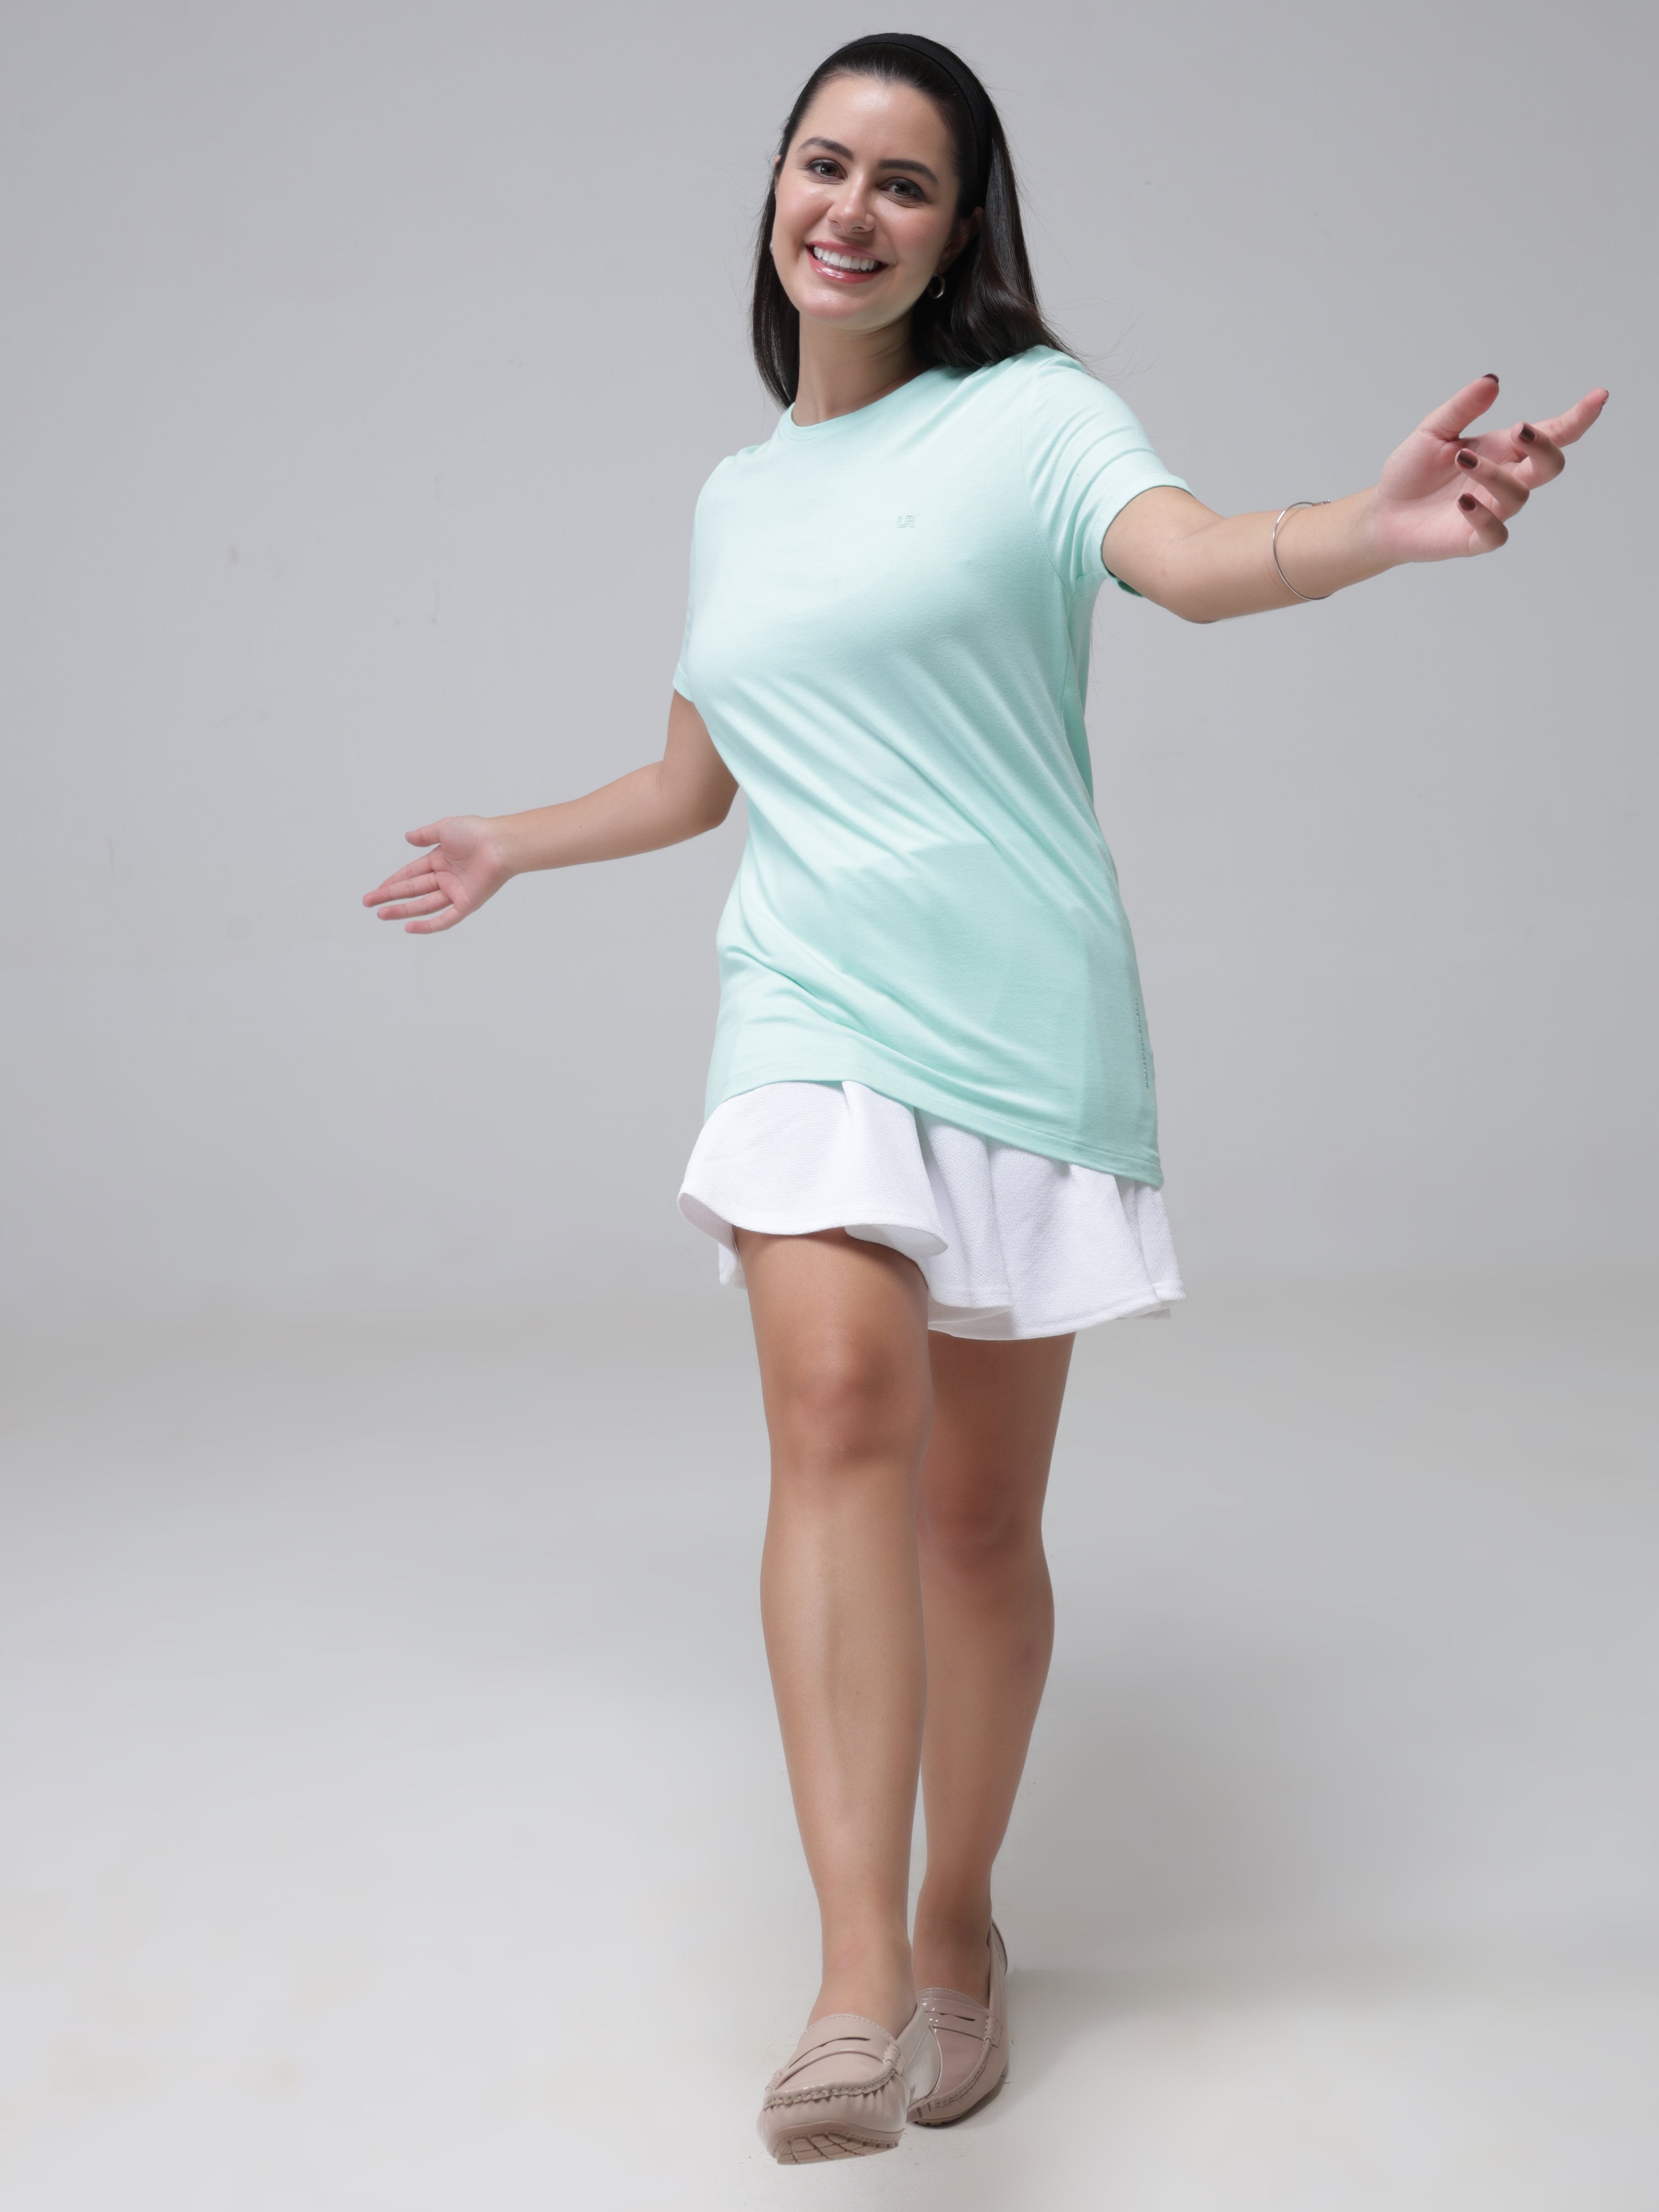 Woman wearing a light green round-neck T-shirt with white skirt, smiling and posing in a casual outfit.